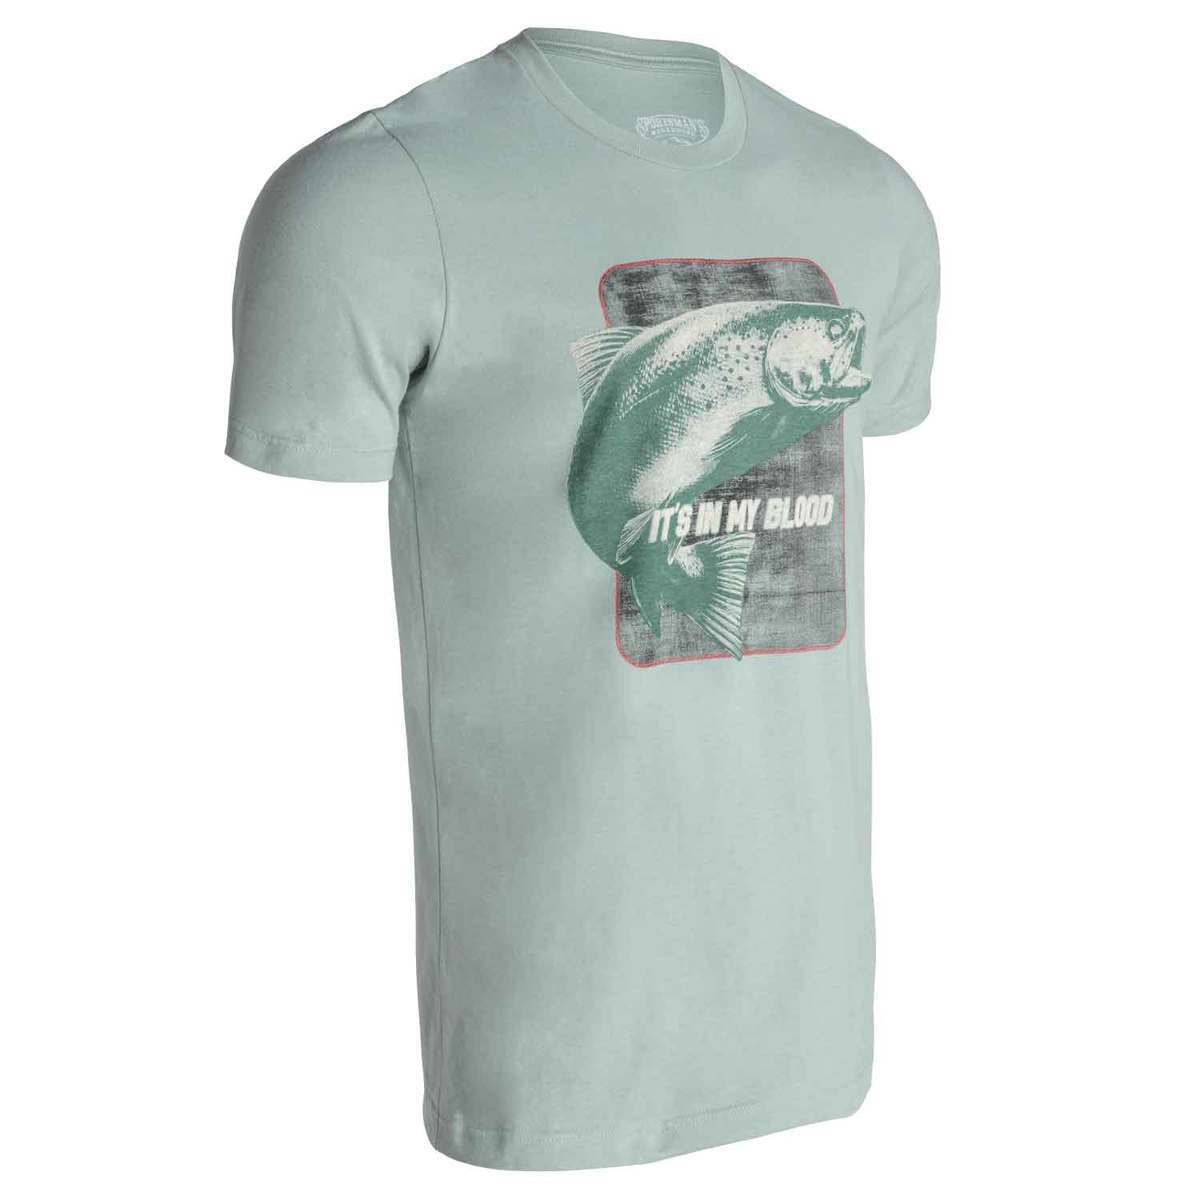 Orvis Men's Classic Fit Outdoor Graphic T-shirt Duck Green M,L,XL